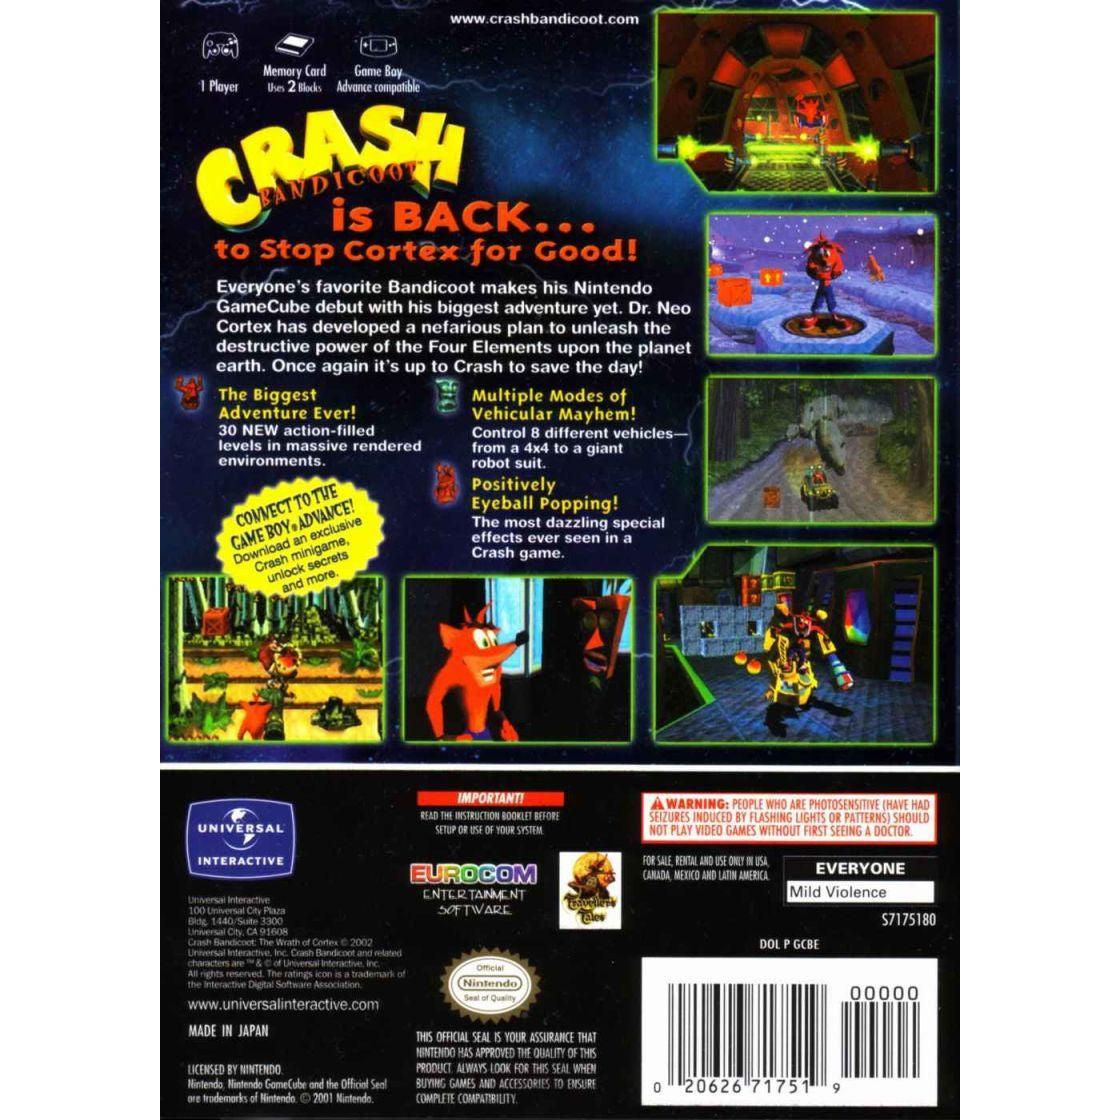 Crash Bandicoot: The Wrath of Cortex (Player's Choice) - Nintendo GameCube Game Complete - YourGamingShop.com - Buy, Sell, Trade Video Games Online. 120 Day Warranty. Satisfaction Guaranteed.